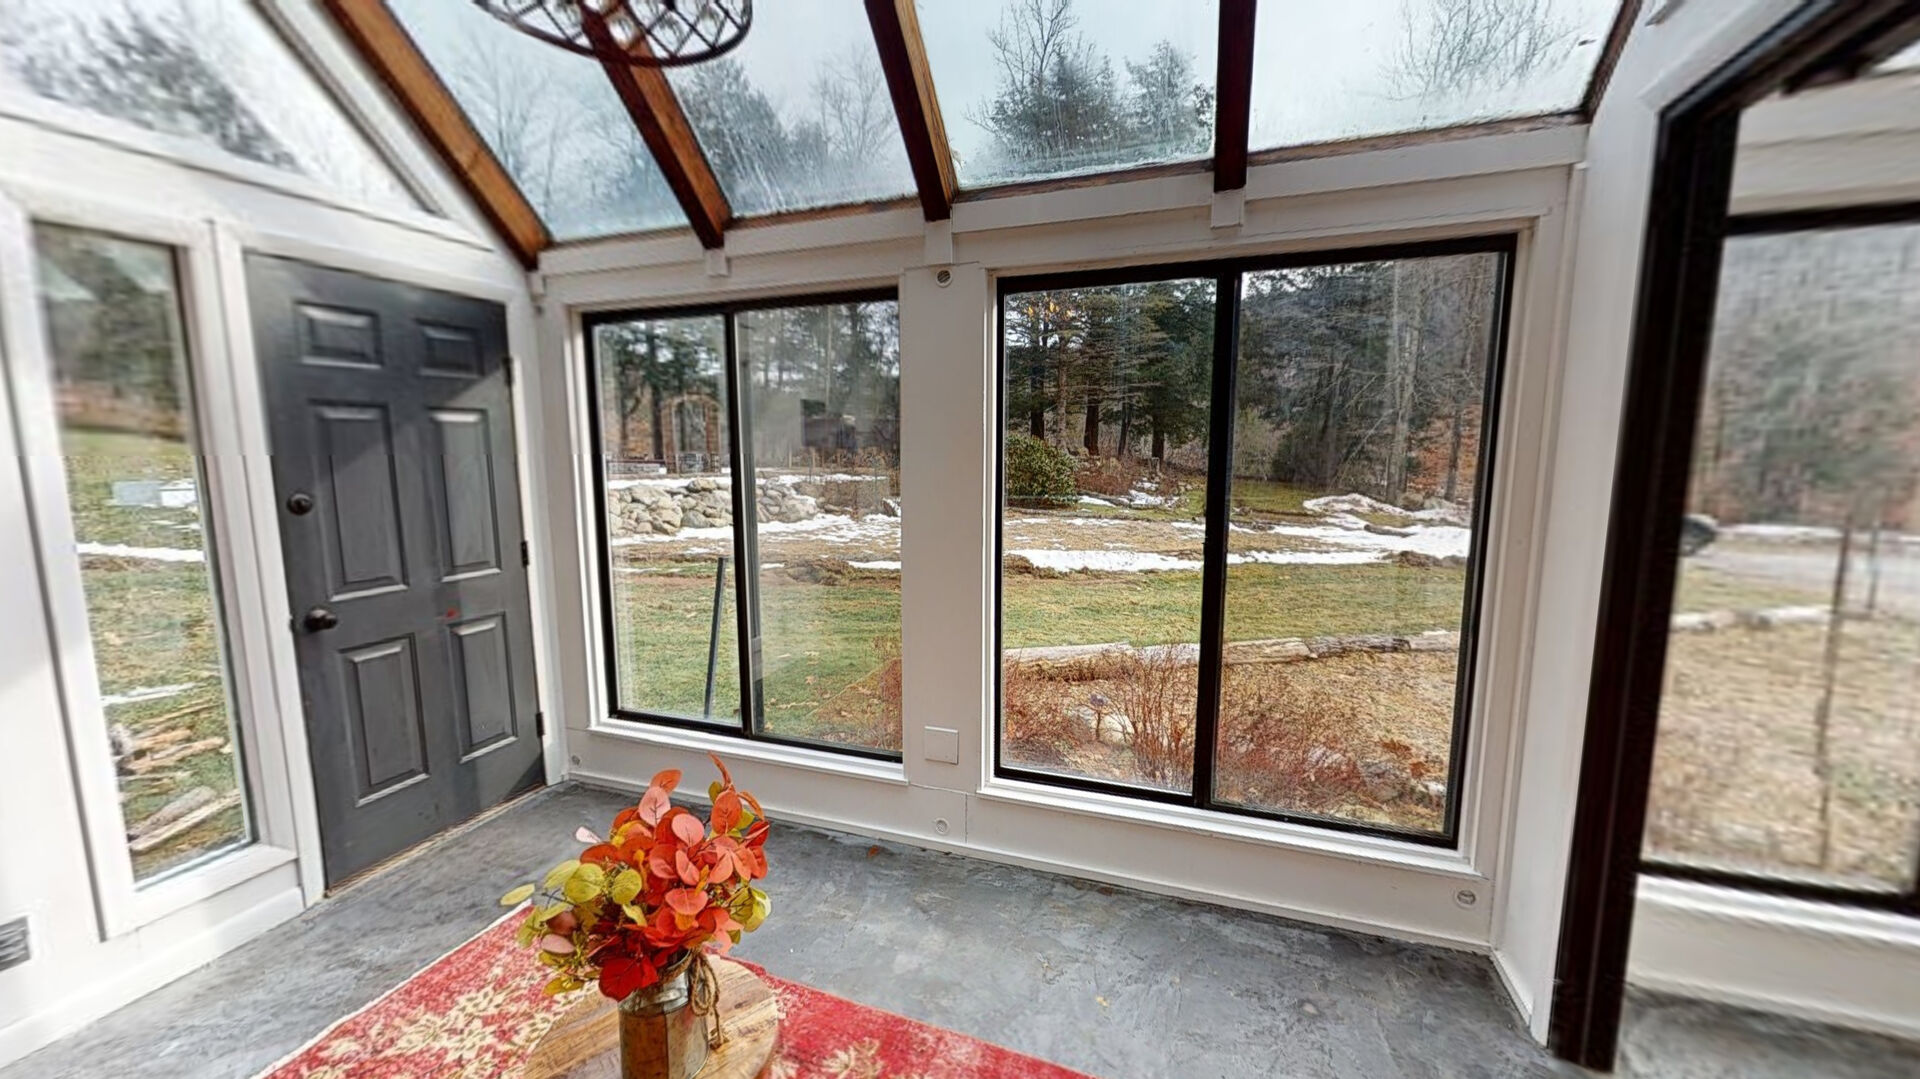 Sunroom with small free standing fireplace